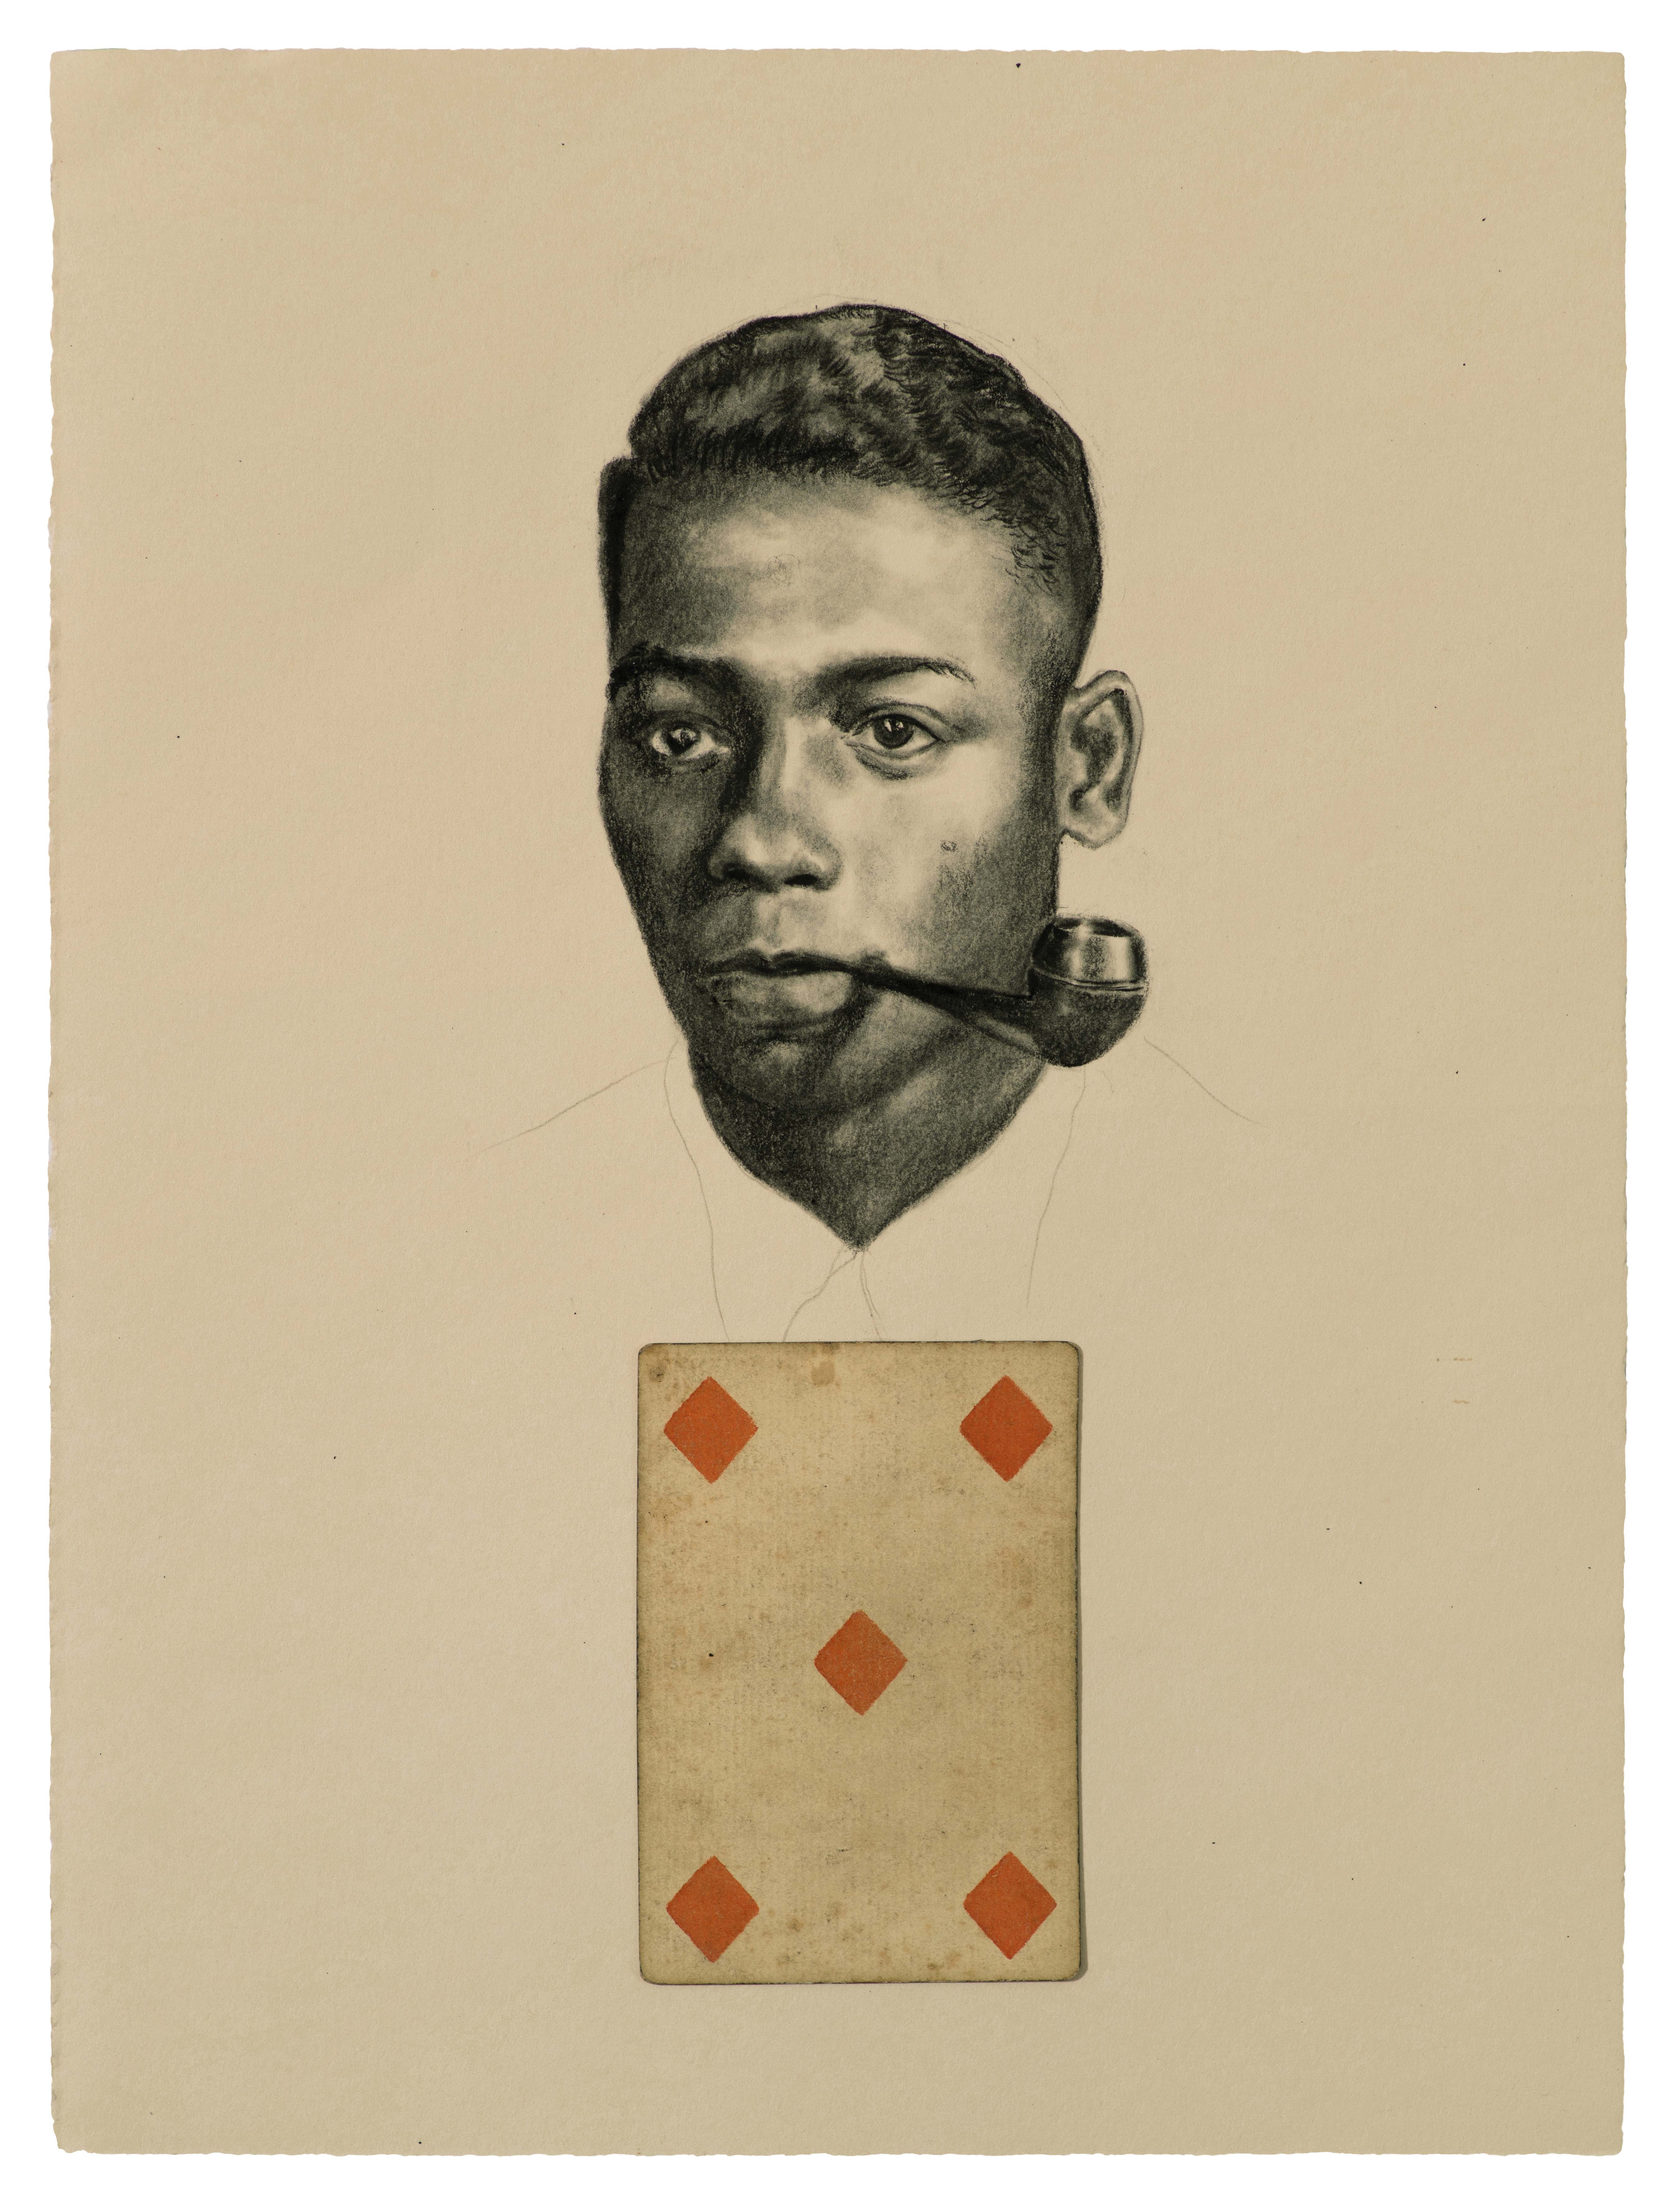 Disembodied head of a man with a pipe in his mouth. Floating beneath him is the 5 of diamonds card from a standard french deck.